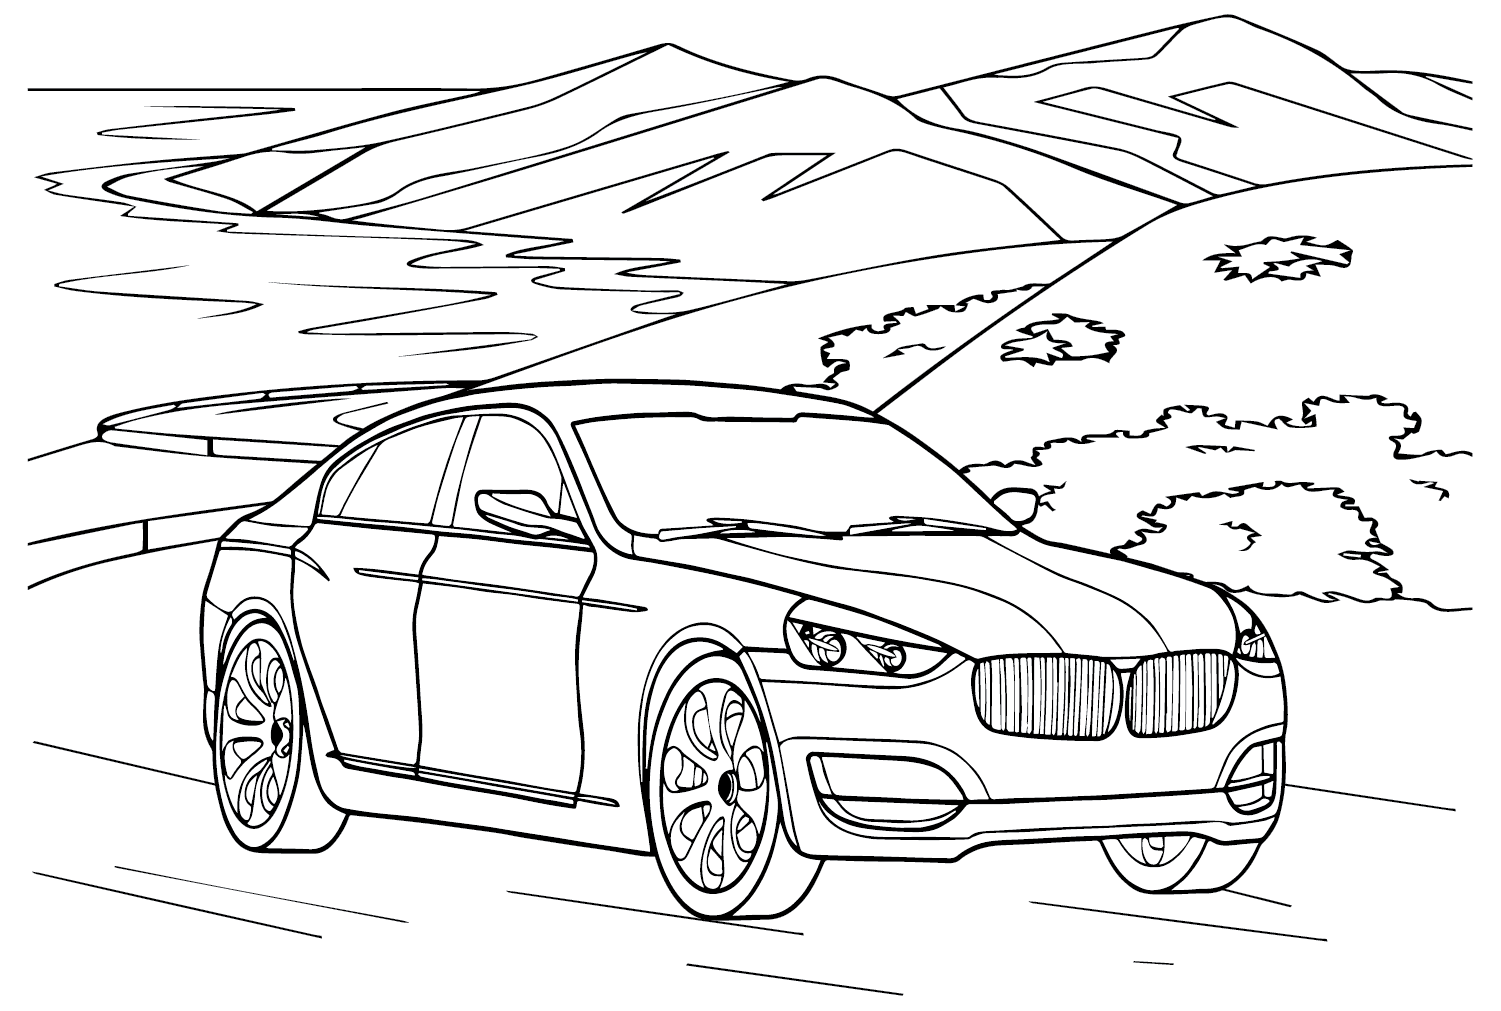 BMW 3 Series GT Coloring Page from BMW